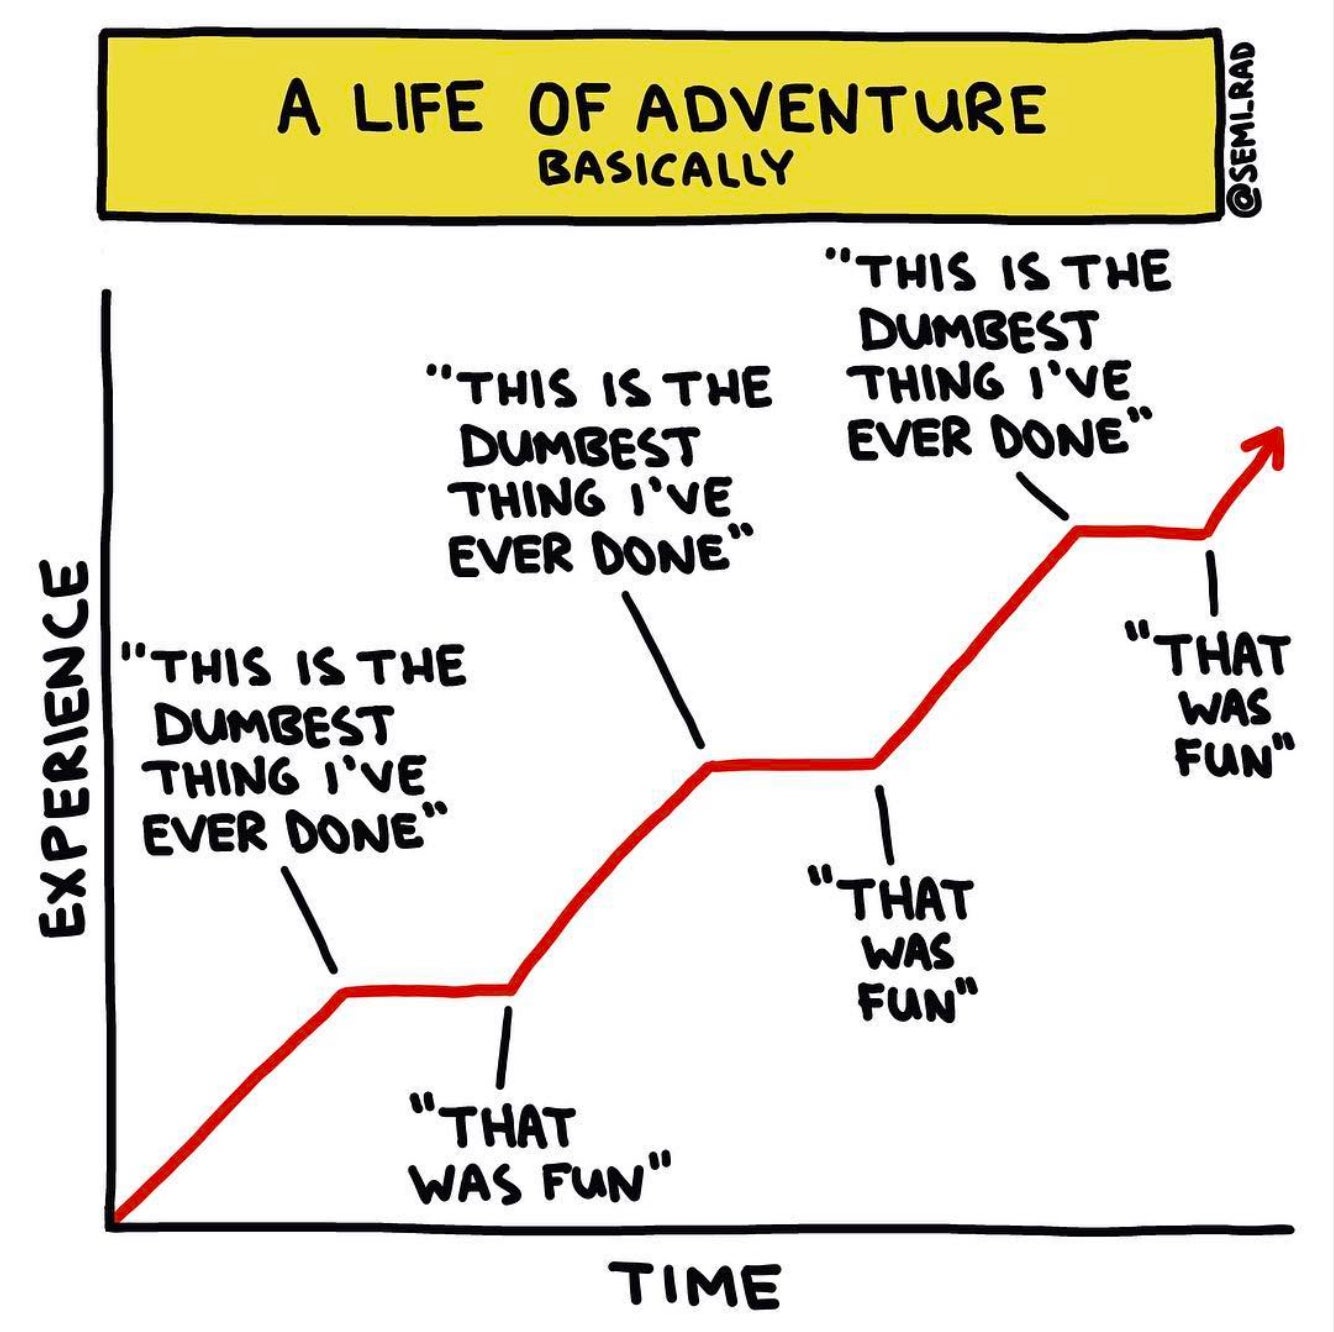 Chart of the life of adventure